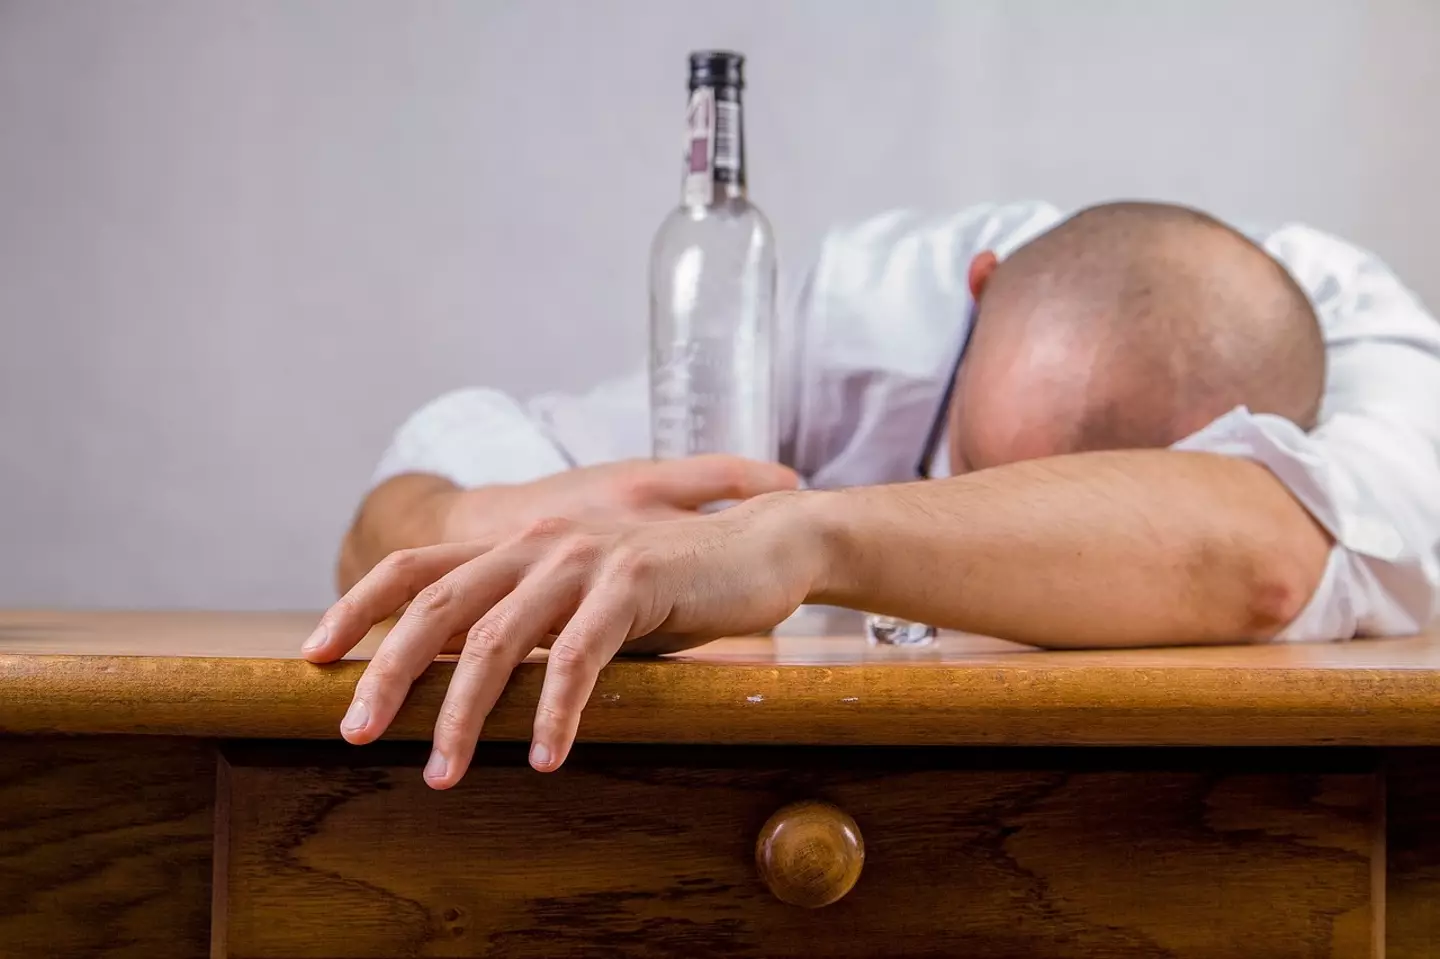 'Functional Alcoholics' can use booze to get through the day.